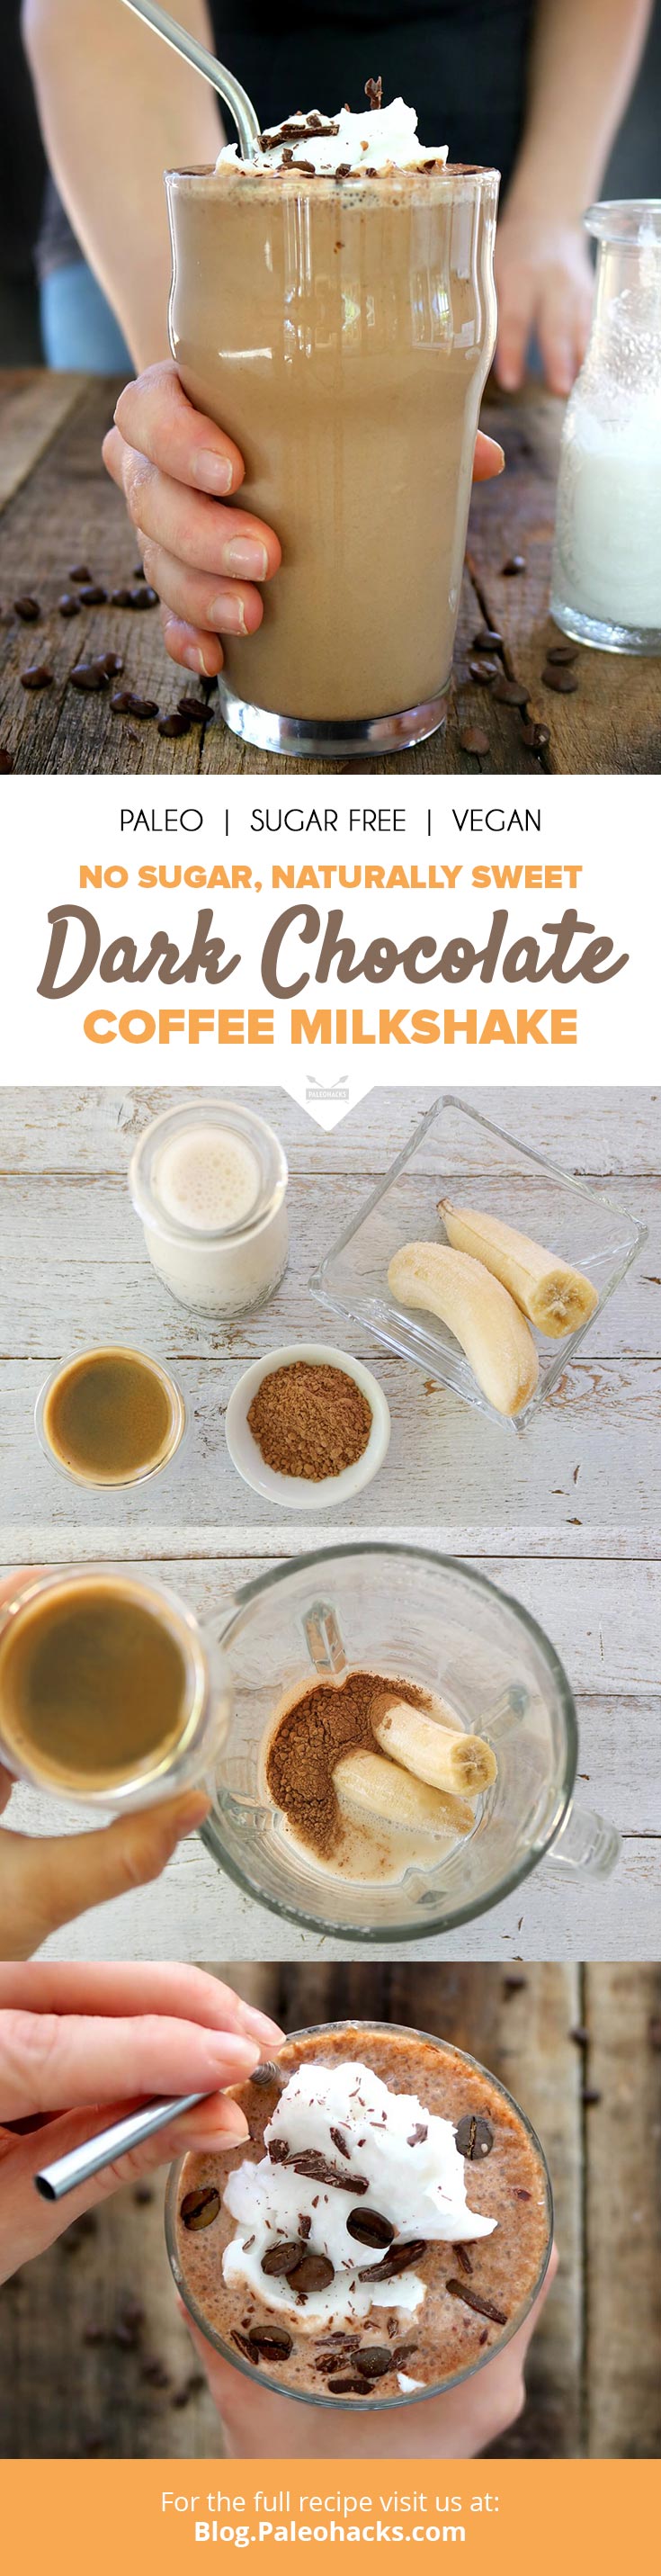 This decadent coffee milkshake combines the richness of coffee with real cacao for an energy-boosting chocolate drink without the sugar crash.